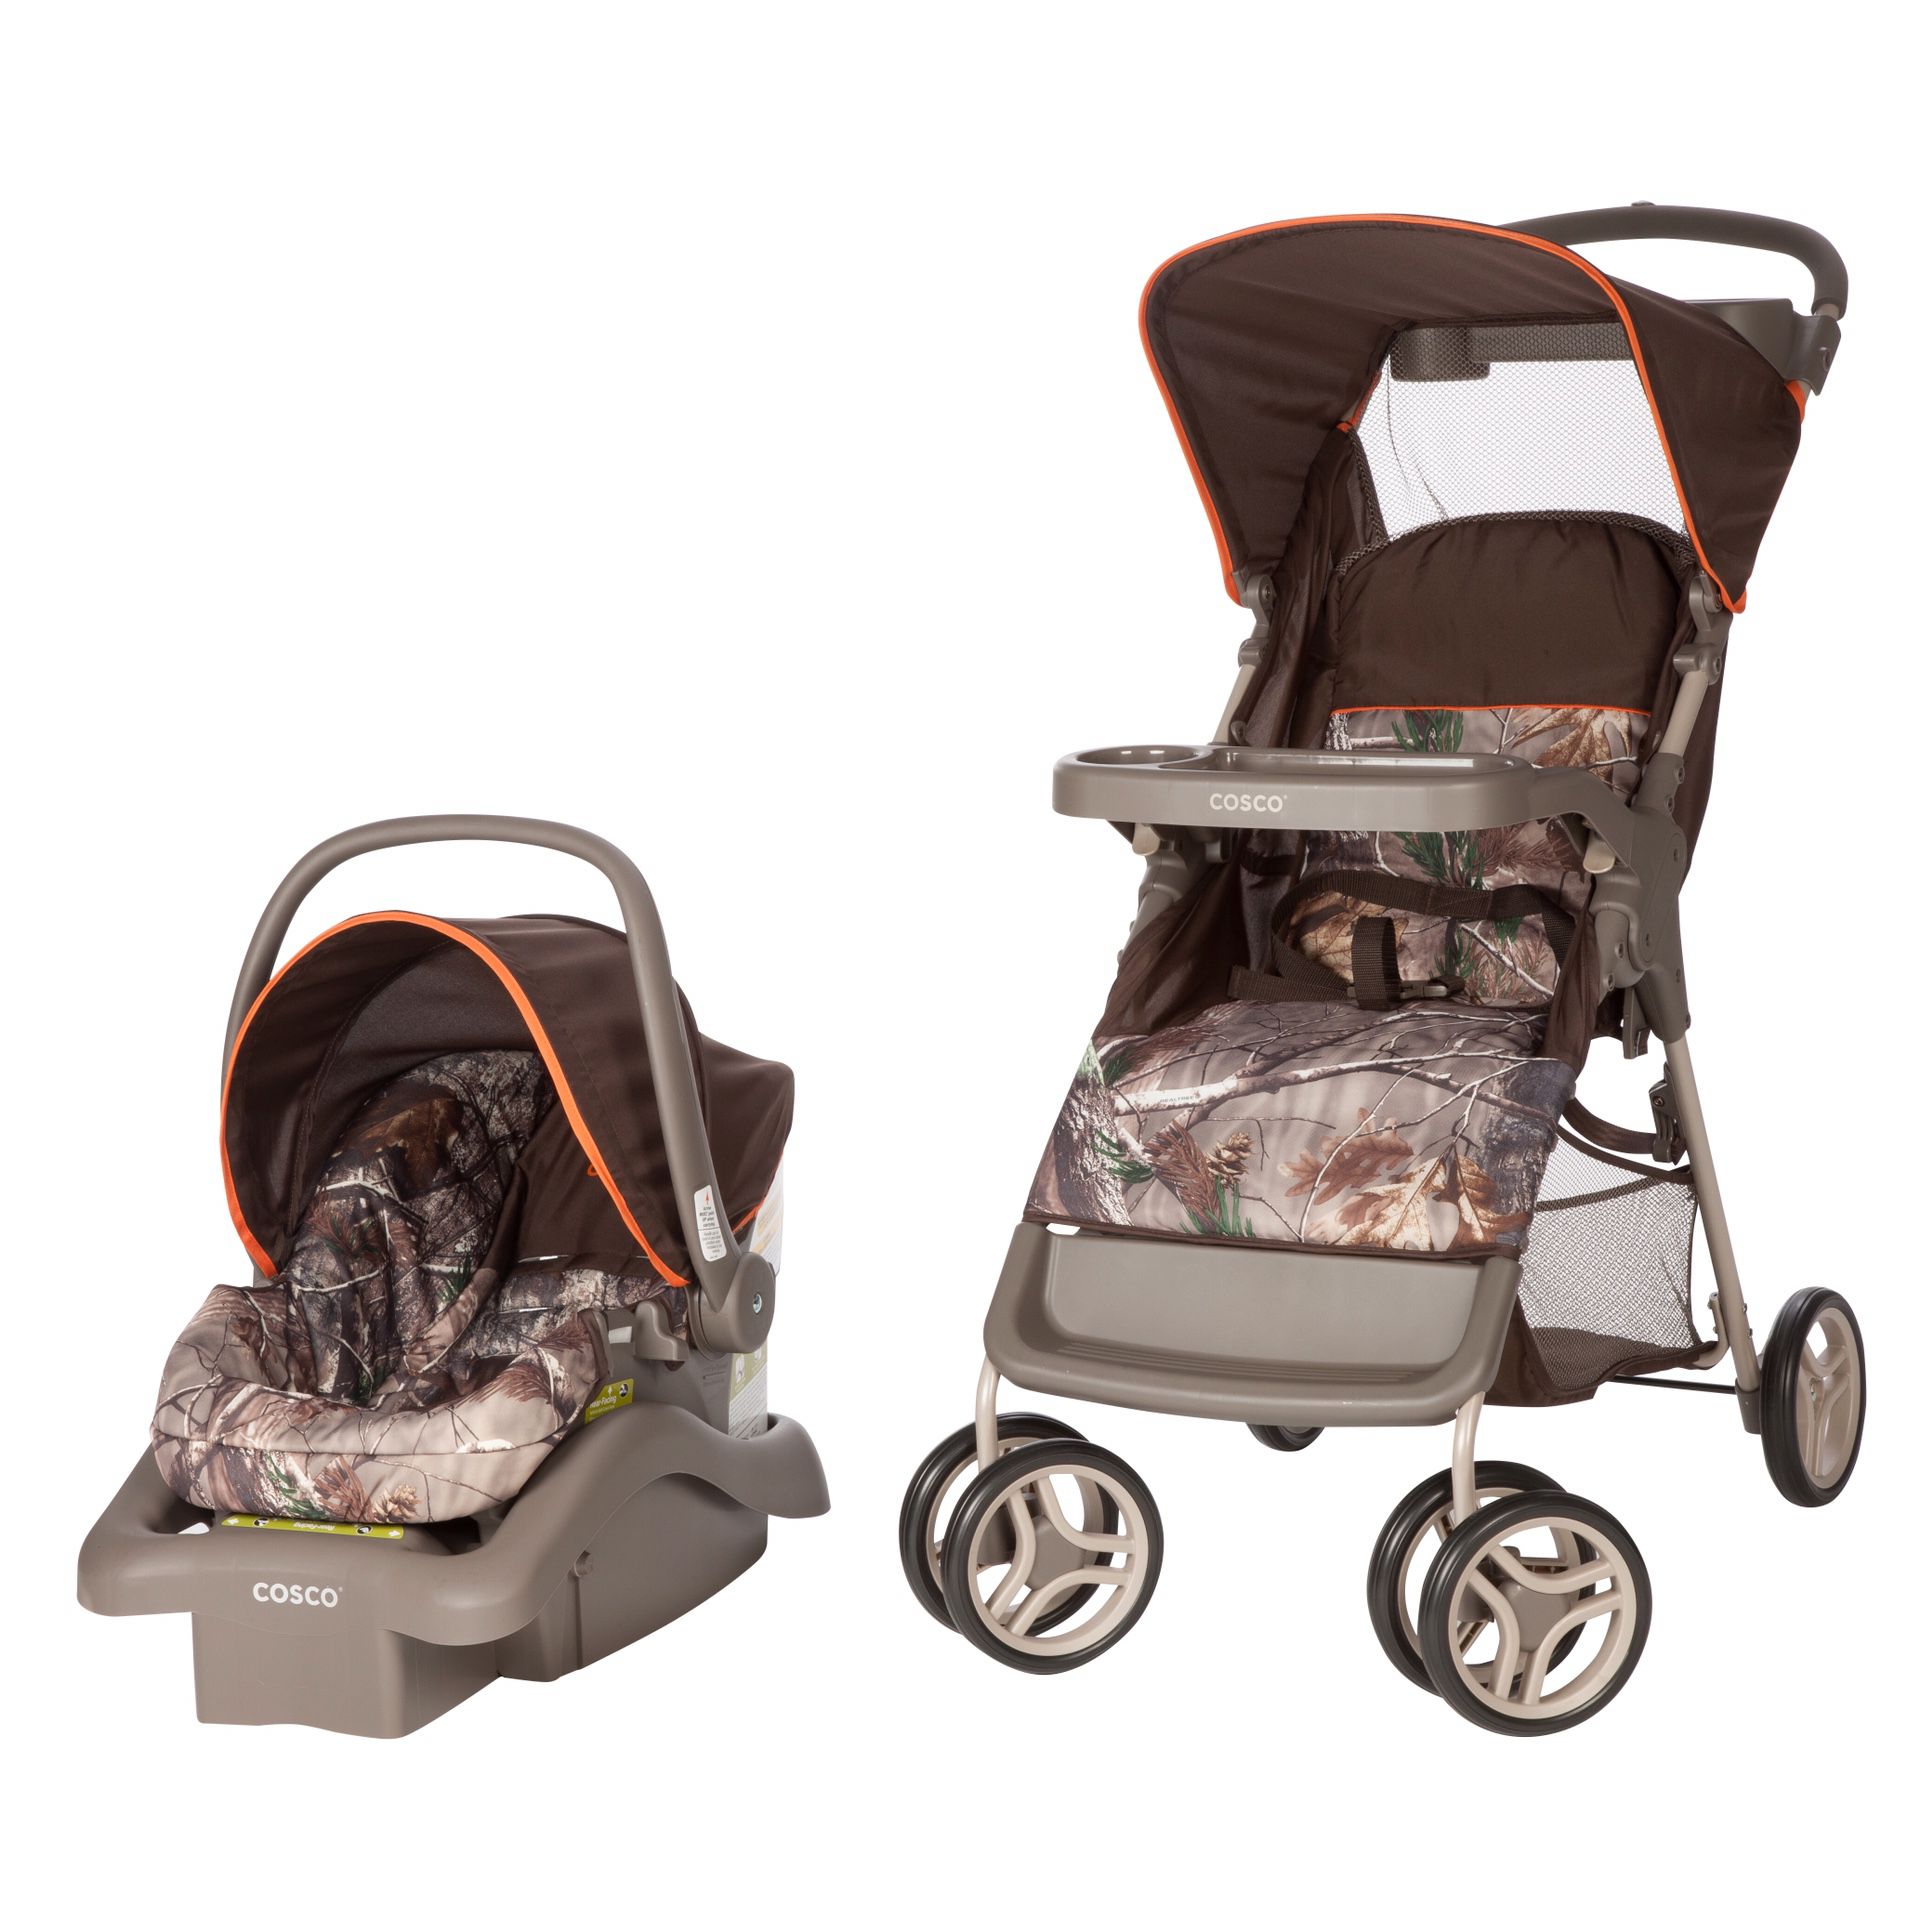 Cosco car seat and stroller combo